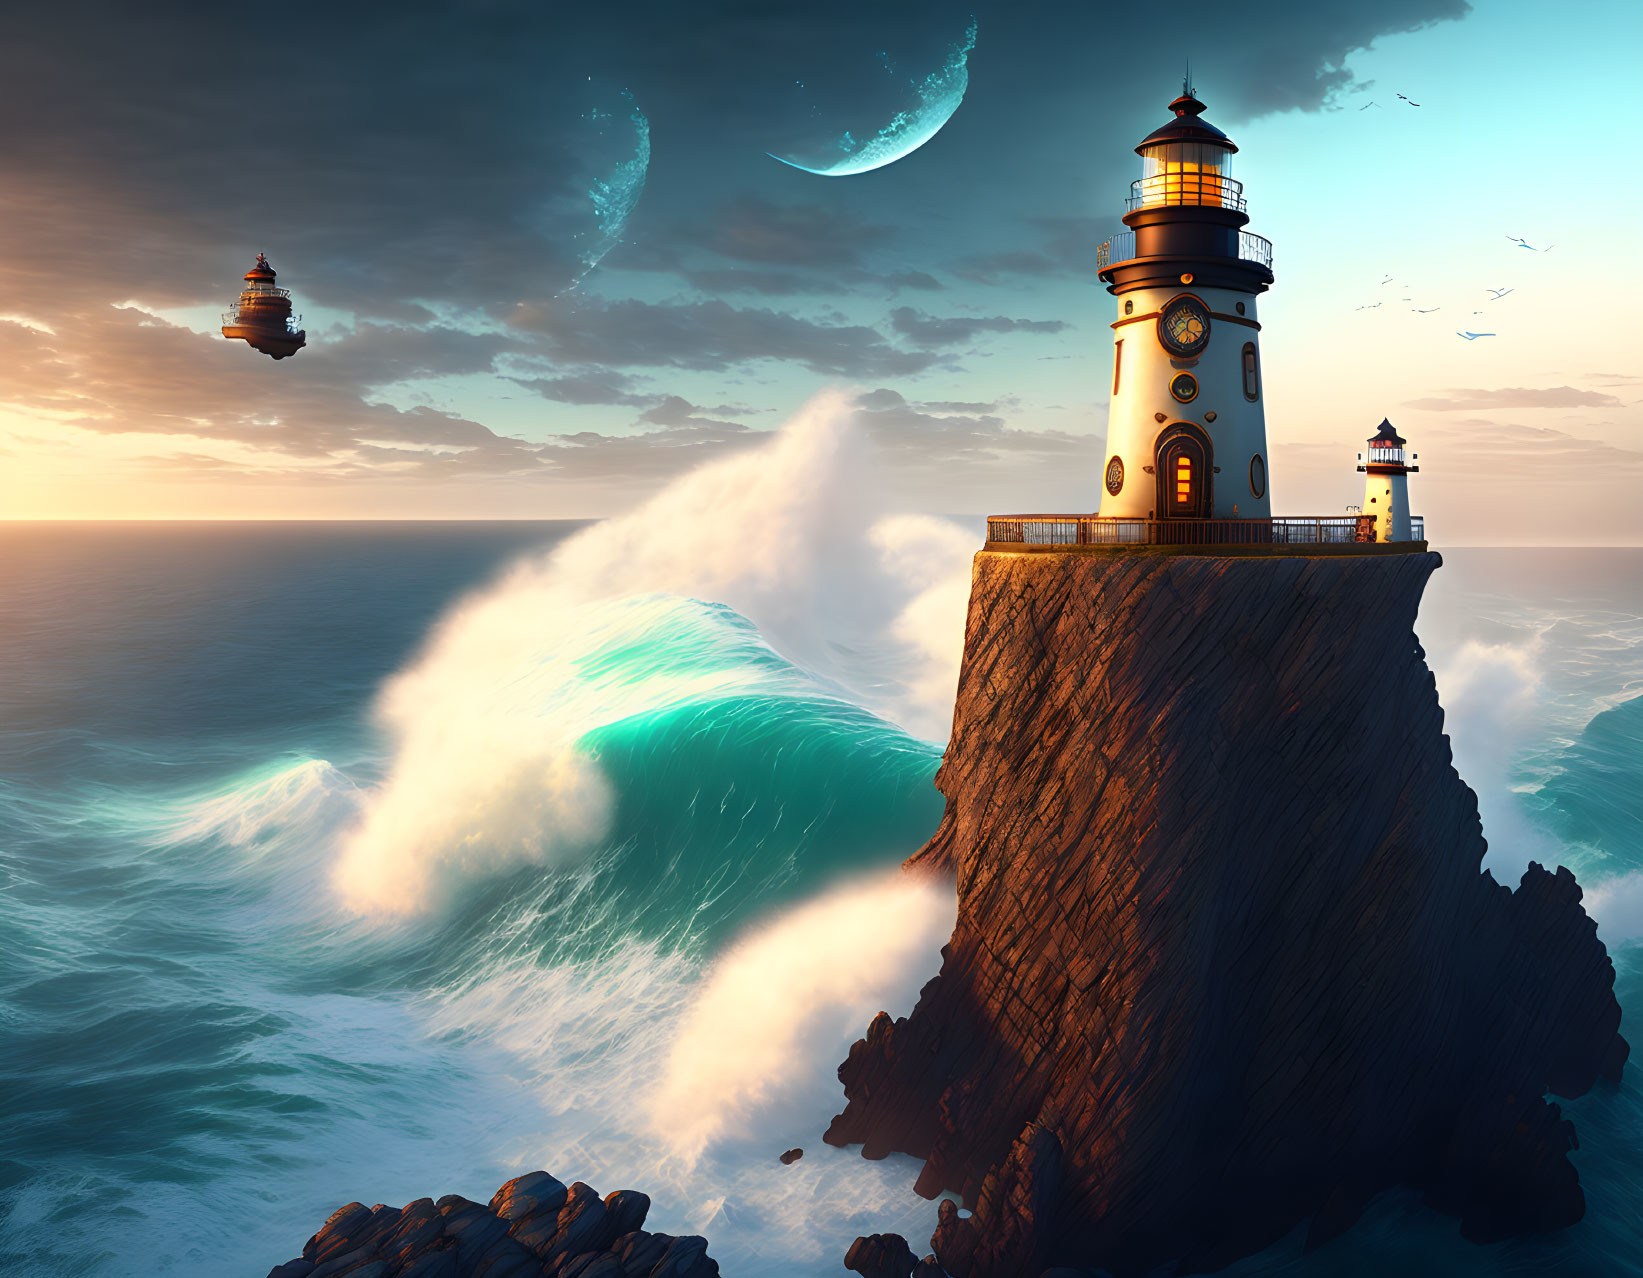 Fantastical lighthouse on cliff with crescent moon and floating island